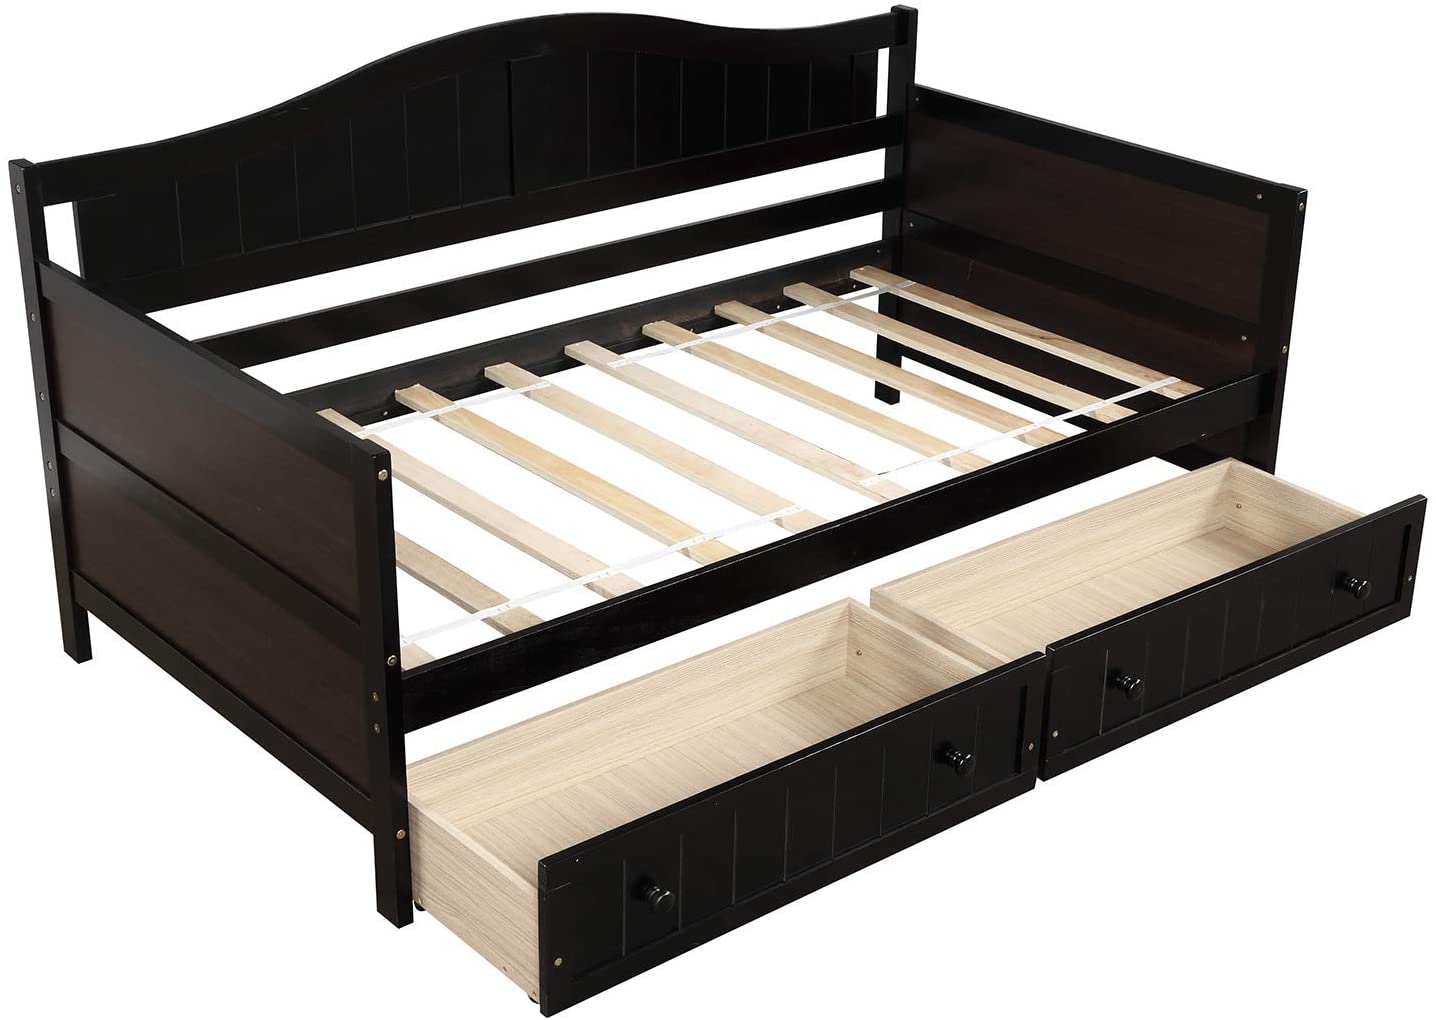 Details about  / Twin Size Daybed Bed Frame Wooden Sofa Bed Platform with Storage Drawers